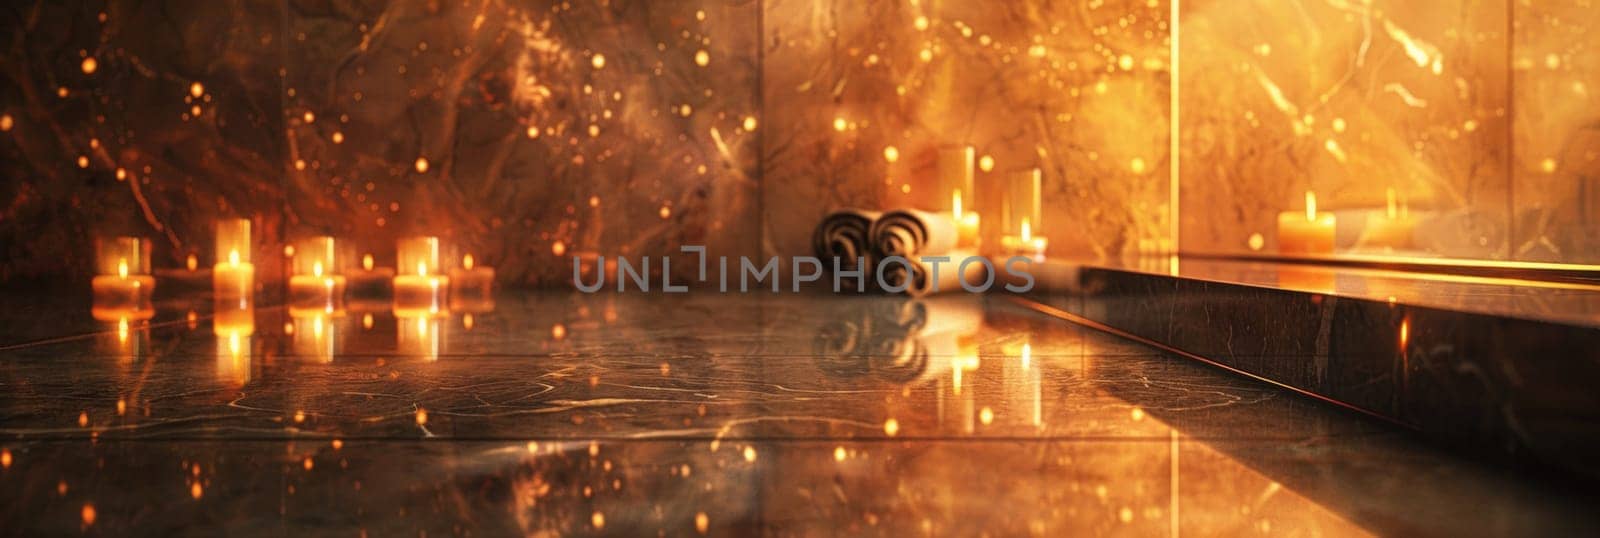 A bathroom with candles lit on the floor and a mirror, AI by starush